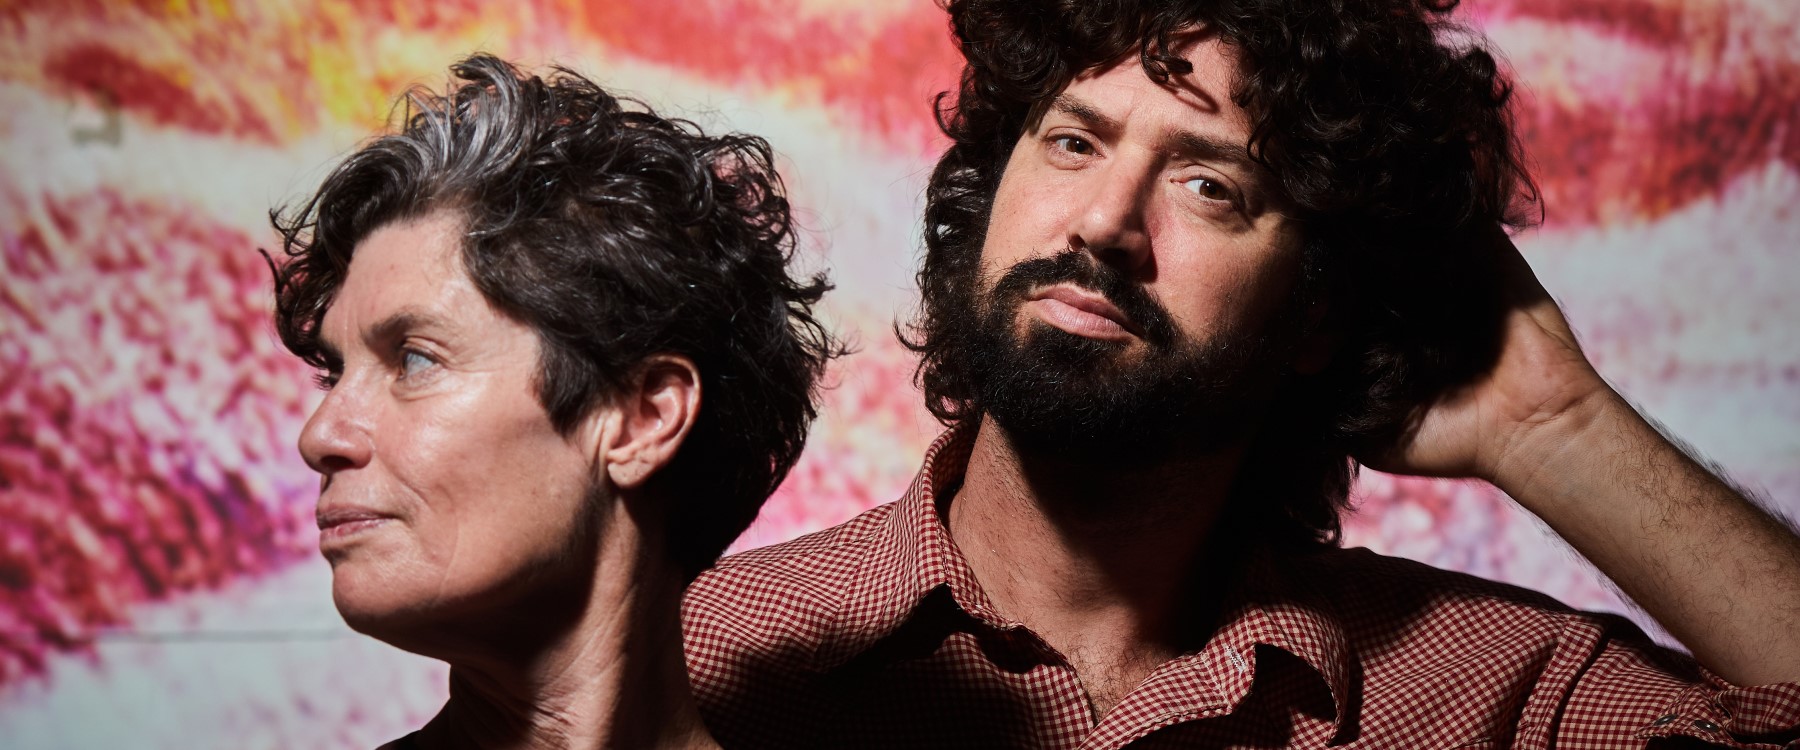 A close shot of two performers standing in front of a colourful digitally rendered image of reds, pinks, oranges and whites. The performer on the left has short dark and grey hair and looks off to the left. The performer on the right looks directly at the viewer and is wearing a red checkered shirt, large curly hair and dark facial hair